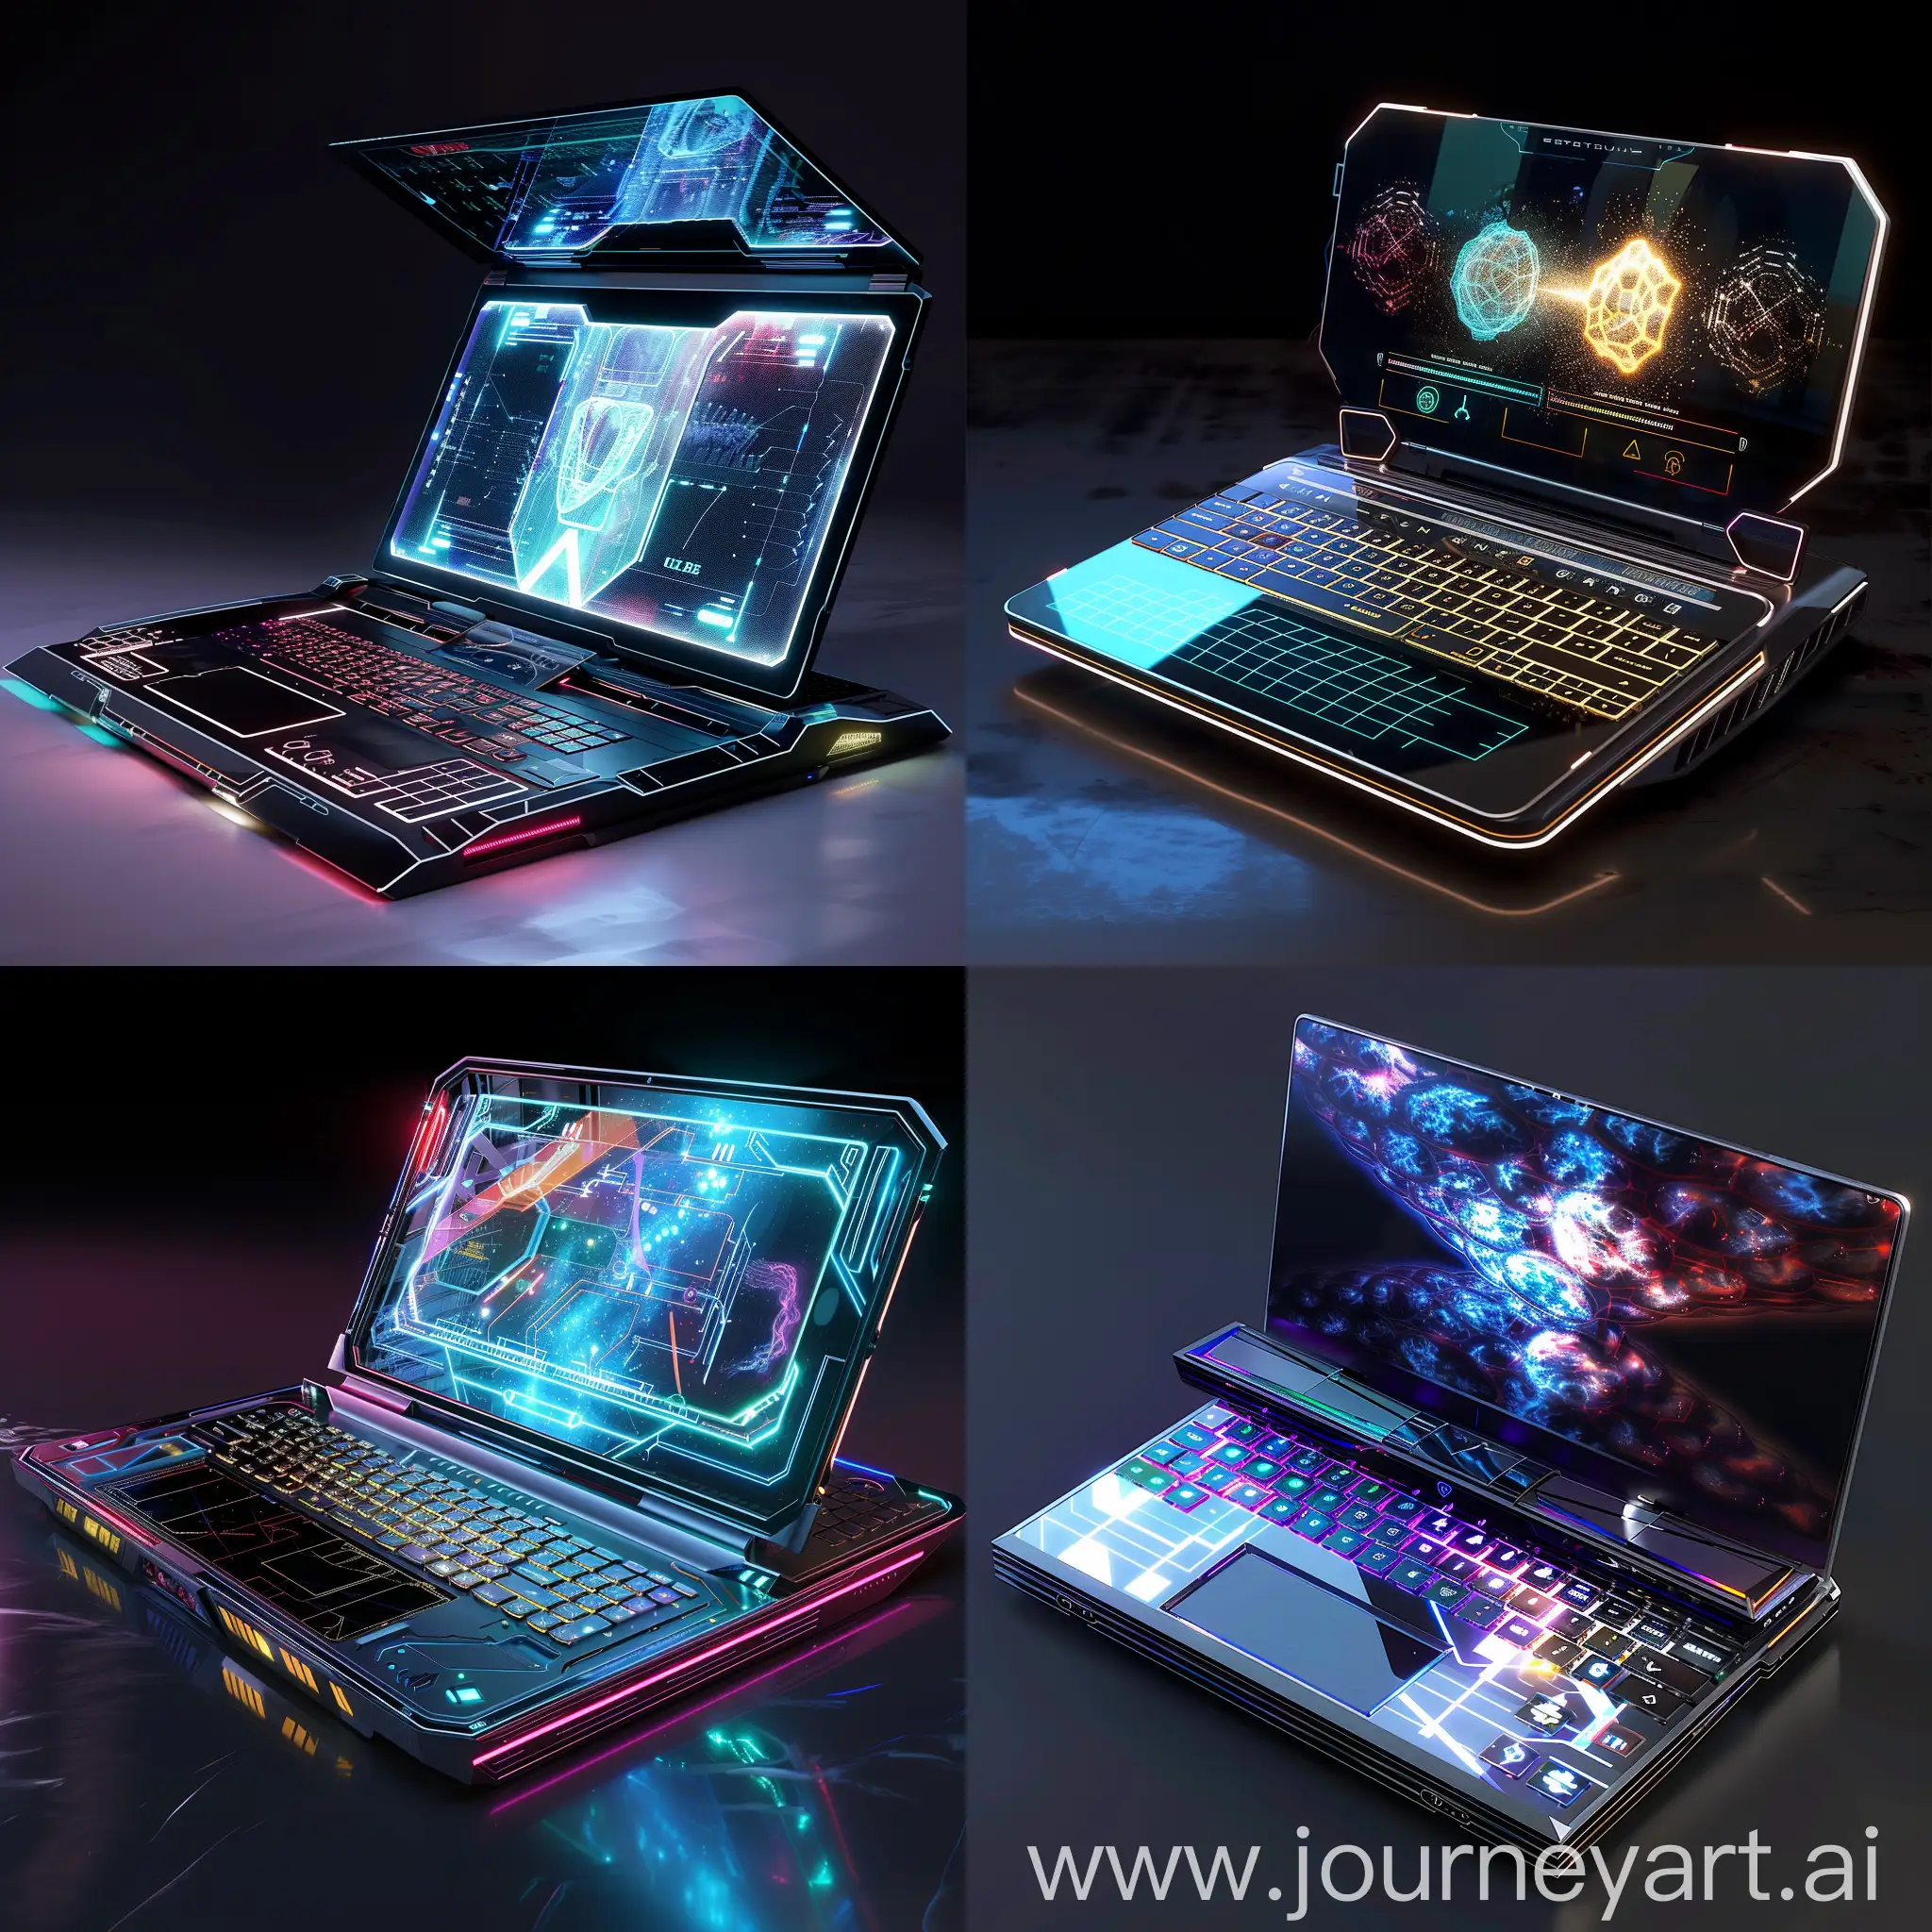 Futuristic laptop, in futuristic style, Quantum Processor, Neural Processing Unit (NPU), Graphene-Based Batteries, Optical Computing, DNA Data Storage, Quantum Dot Displays, Molecular Cooling System, Biometric Authentication with Brainwave Recognition, Holographic Projection Interface, Self-Healing Materials, Flexible Display, Transparent OLED Screen Lid, Integrated Projector, Advanced Haptic Feedback Keyboard, Solar Panel Lid, 360-Degree Rotating Camera Module, Adaptive E-Ink Touchpad, Gesture Control Sensors, Modular Expansion Ports, Dynamic RGB Light Strips, Foldable OLED Display, MicroLED Backlit Keyboard, OLED Touch Bar, OLED Touchpad with Display, MicroLED Augmented Reality Overlay, OLED Dynamic Refresh Rate, MicroLED True Black HDR, OLED Transparent Display Lid, MicroLED Adaptive Contrast Control, OLED Multitouch Screen, OLED Wraparound Display, MicroLED Ambient Lighting Strips, OLED Touch Control Bar, MicroLED Logo Projection, OLED Status Indicators, MicroLED Decorative Patterns, OLED Notification Panel, MicroLED Dynamic Bezels, OLED Wireless Charging Pad, MicroLED Exterior Display, unreal engine 5 --stylize 1000